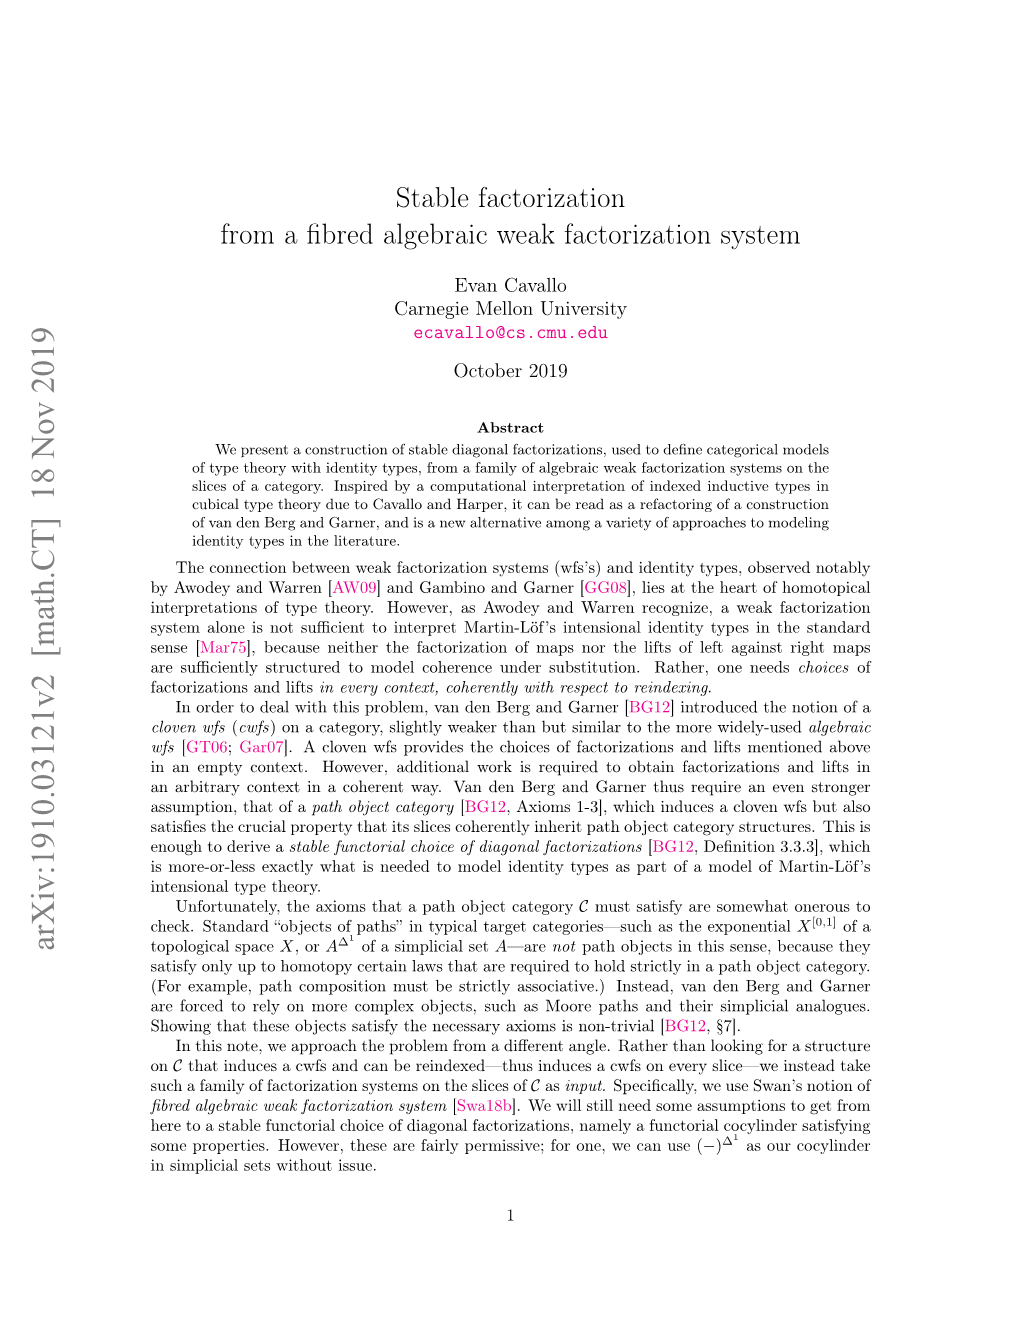 Stable Factorization from a Fibred Algebraic Weak Factorization System